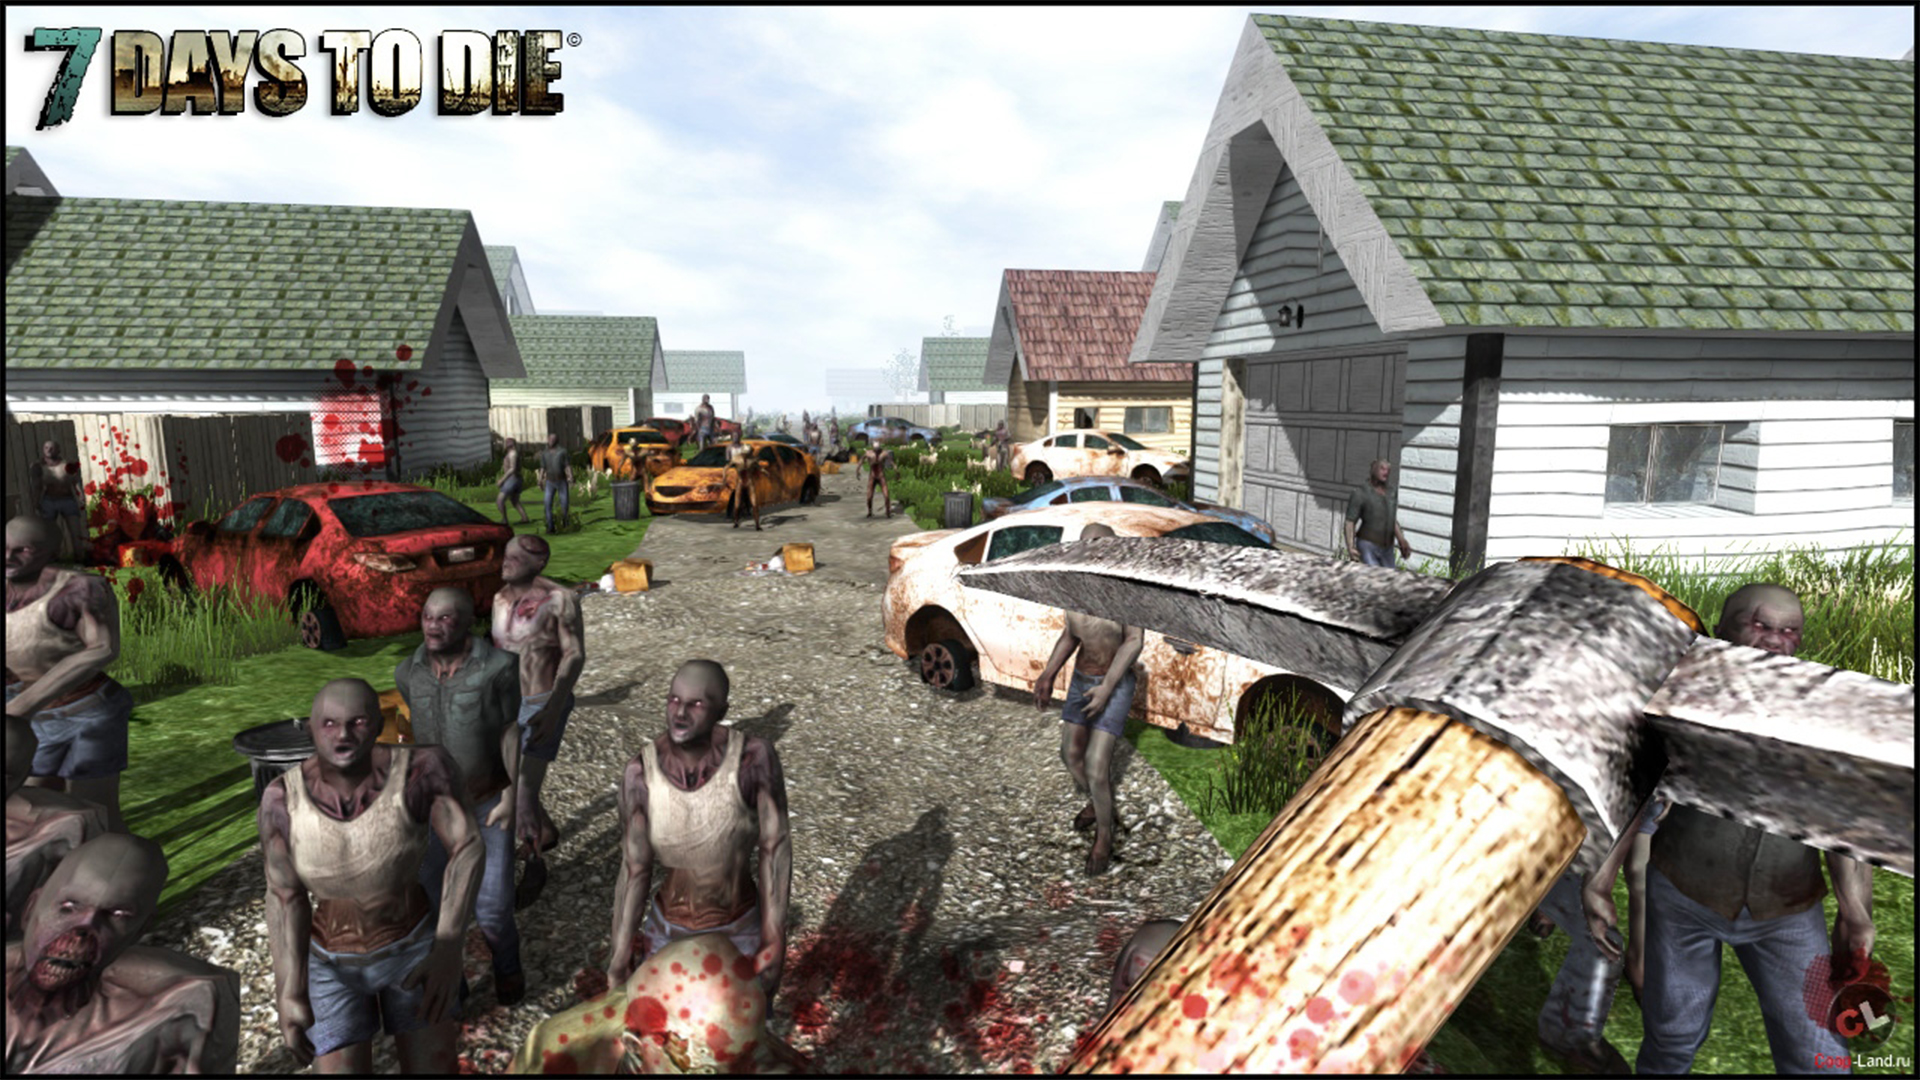 7 day to day похожие. Игра 7 Days to die. 7 Days to die 2013. 7 Days to die 1.